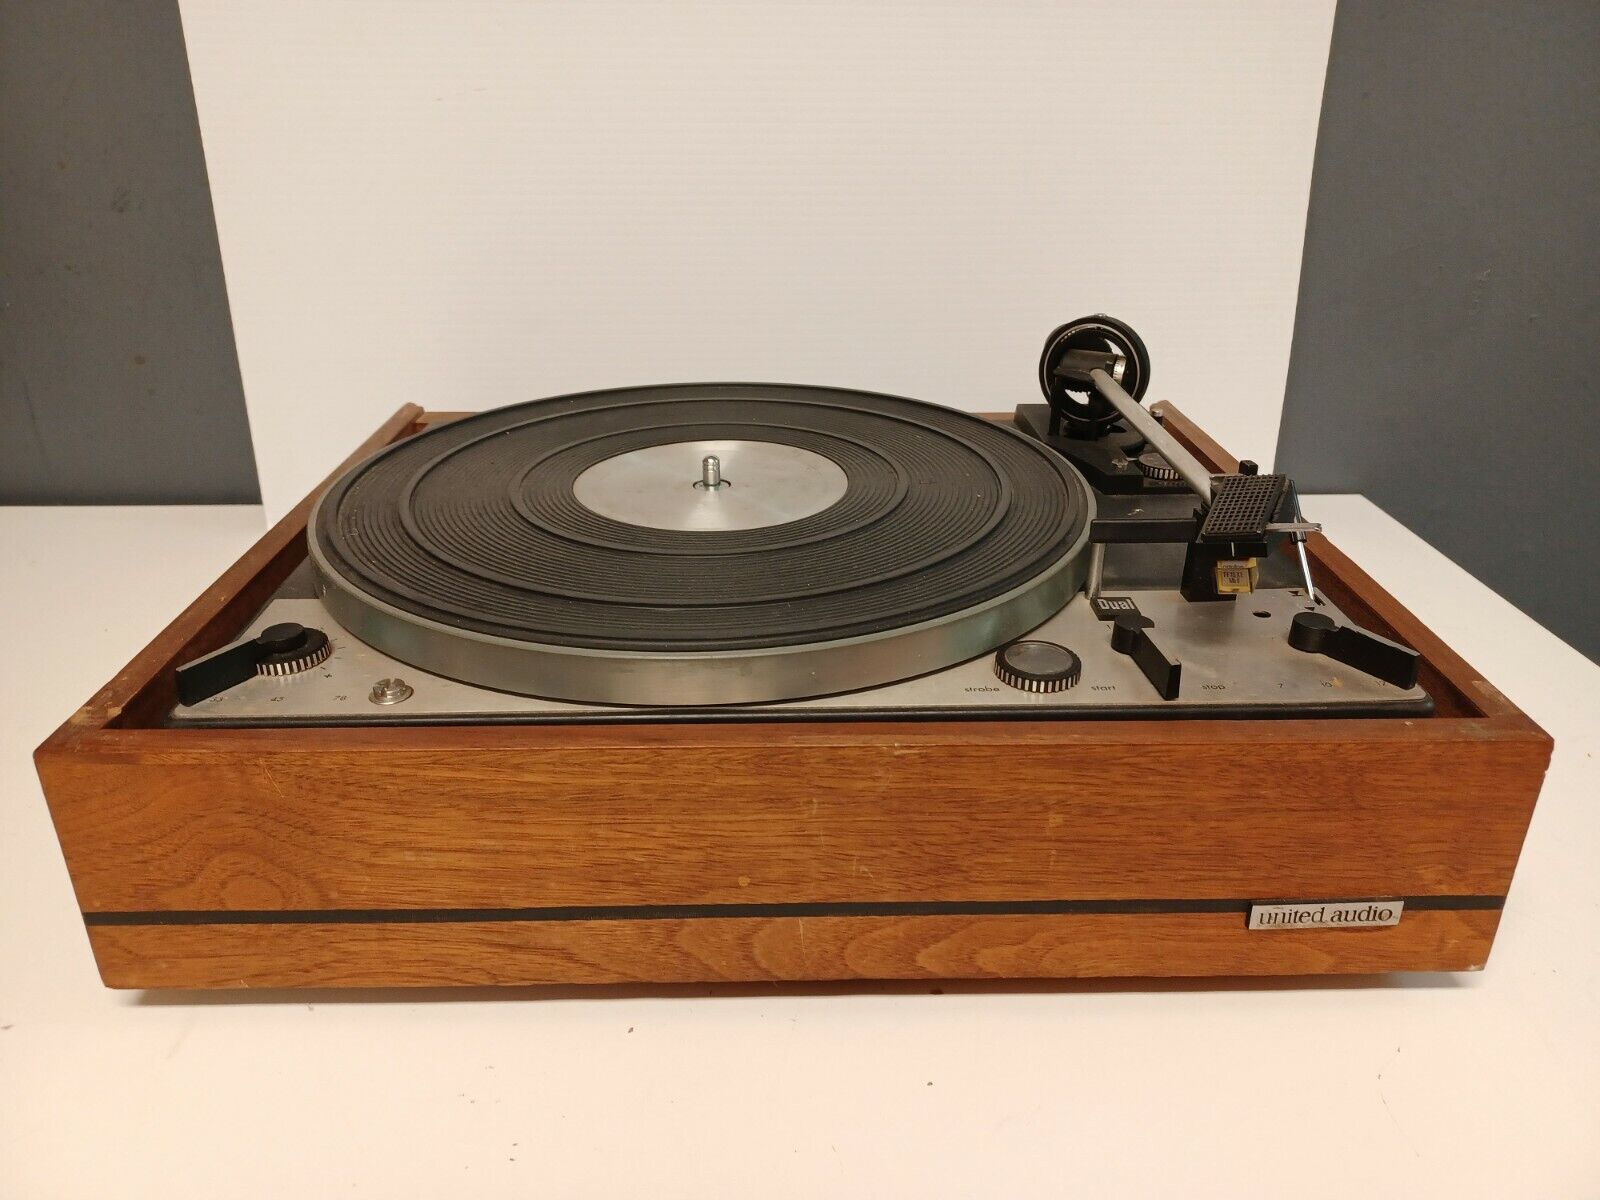 United Audio Dual 1229 T540 Turntable - As Is No Returns